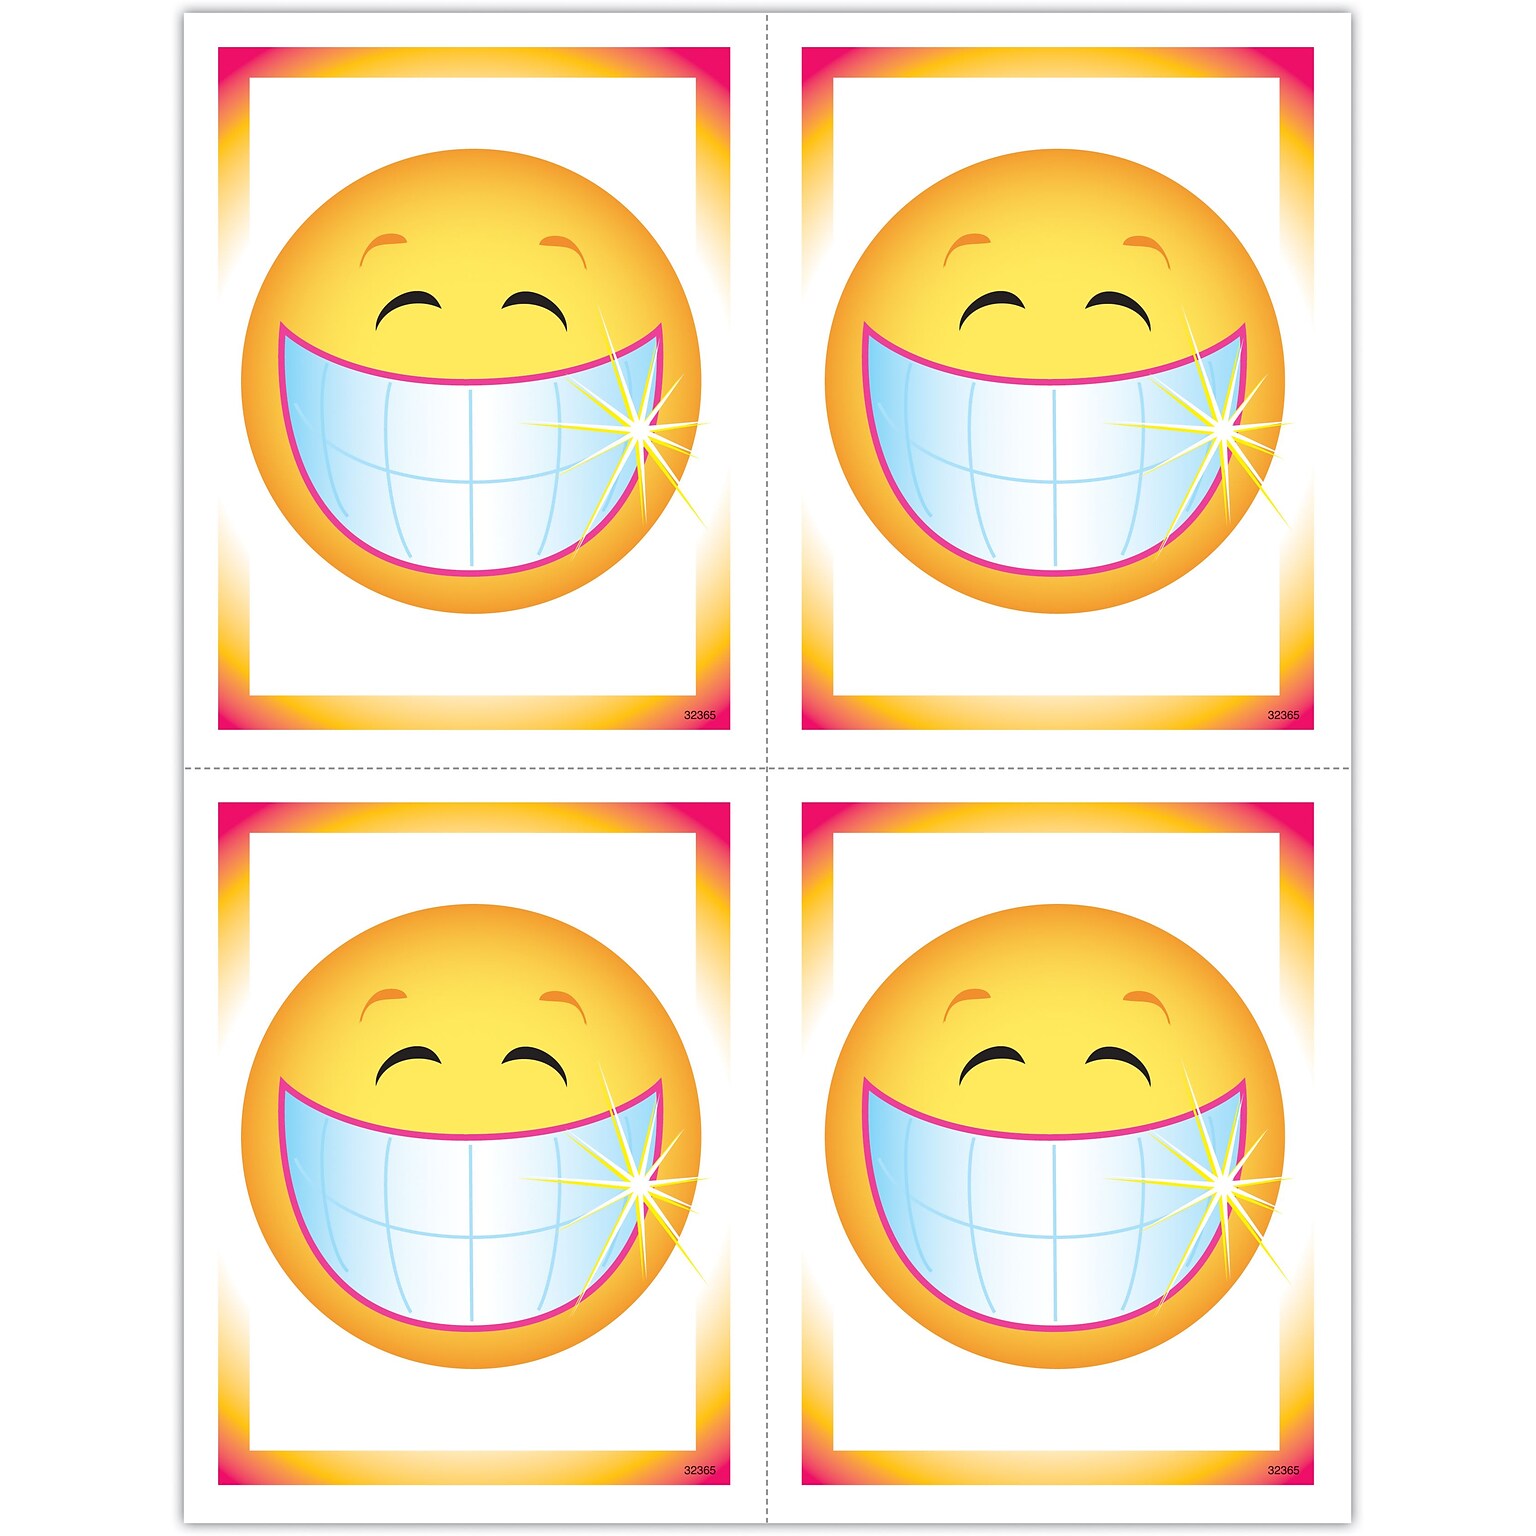 Graphic Image Postcards; for Laser Printer; Smiley Face with Teeth, 100/Pk